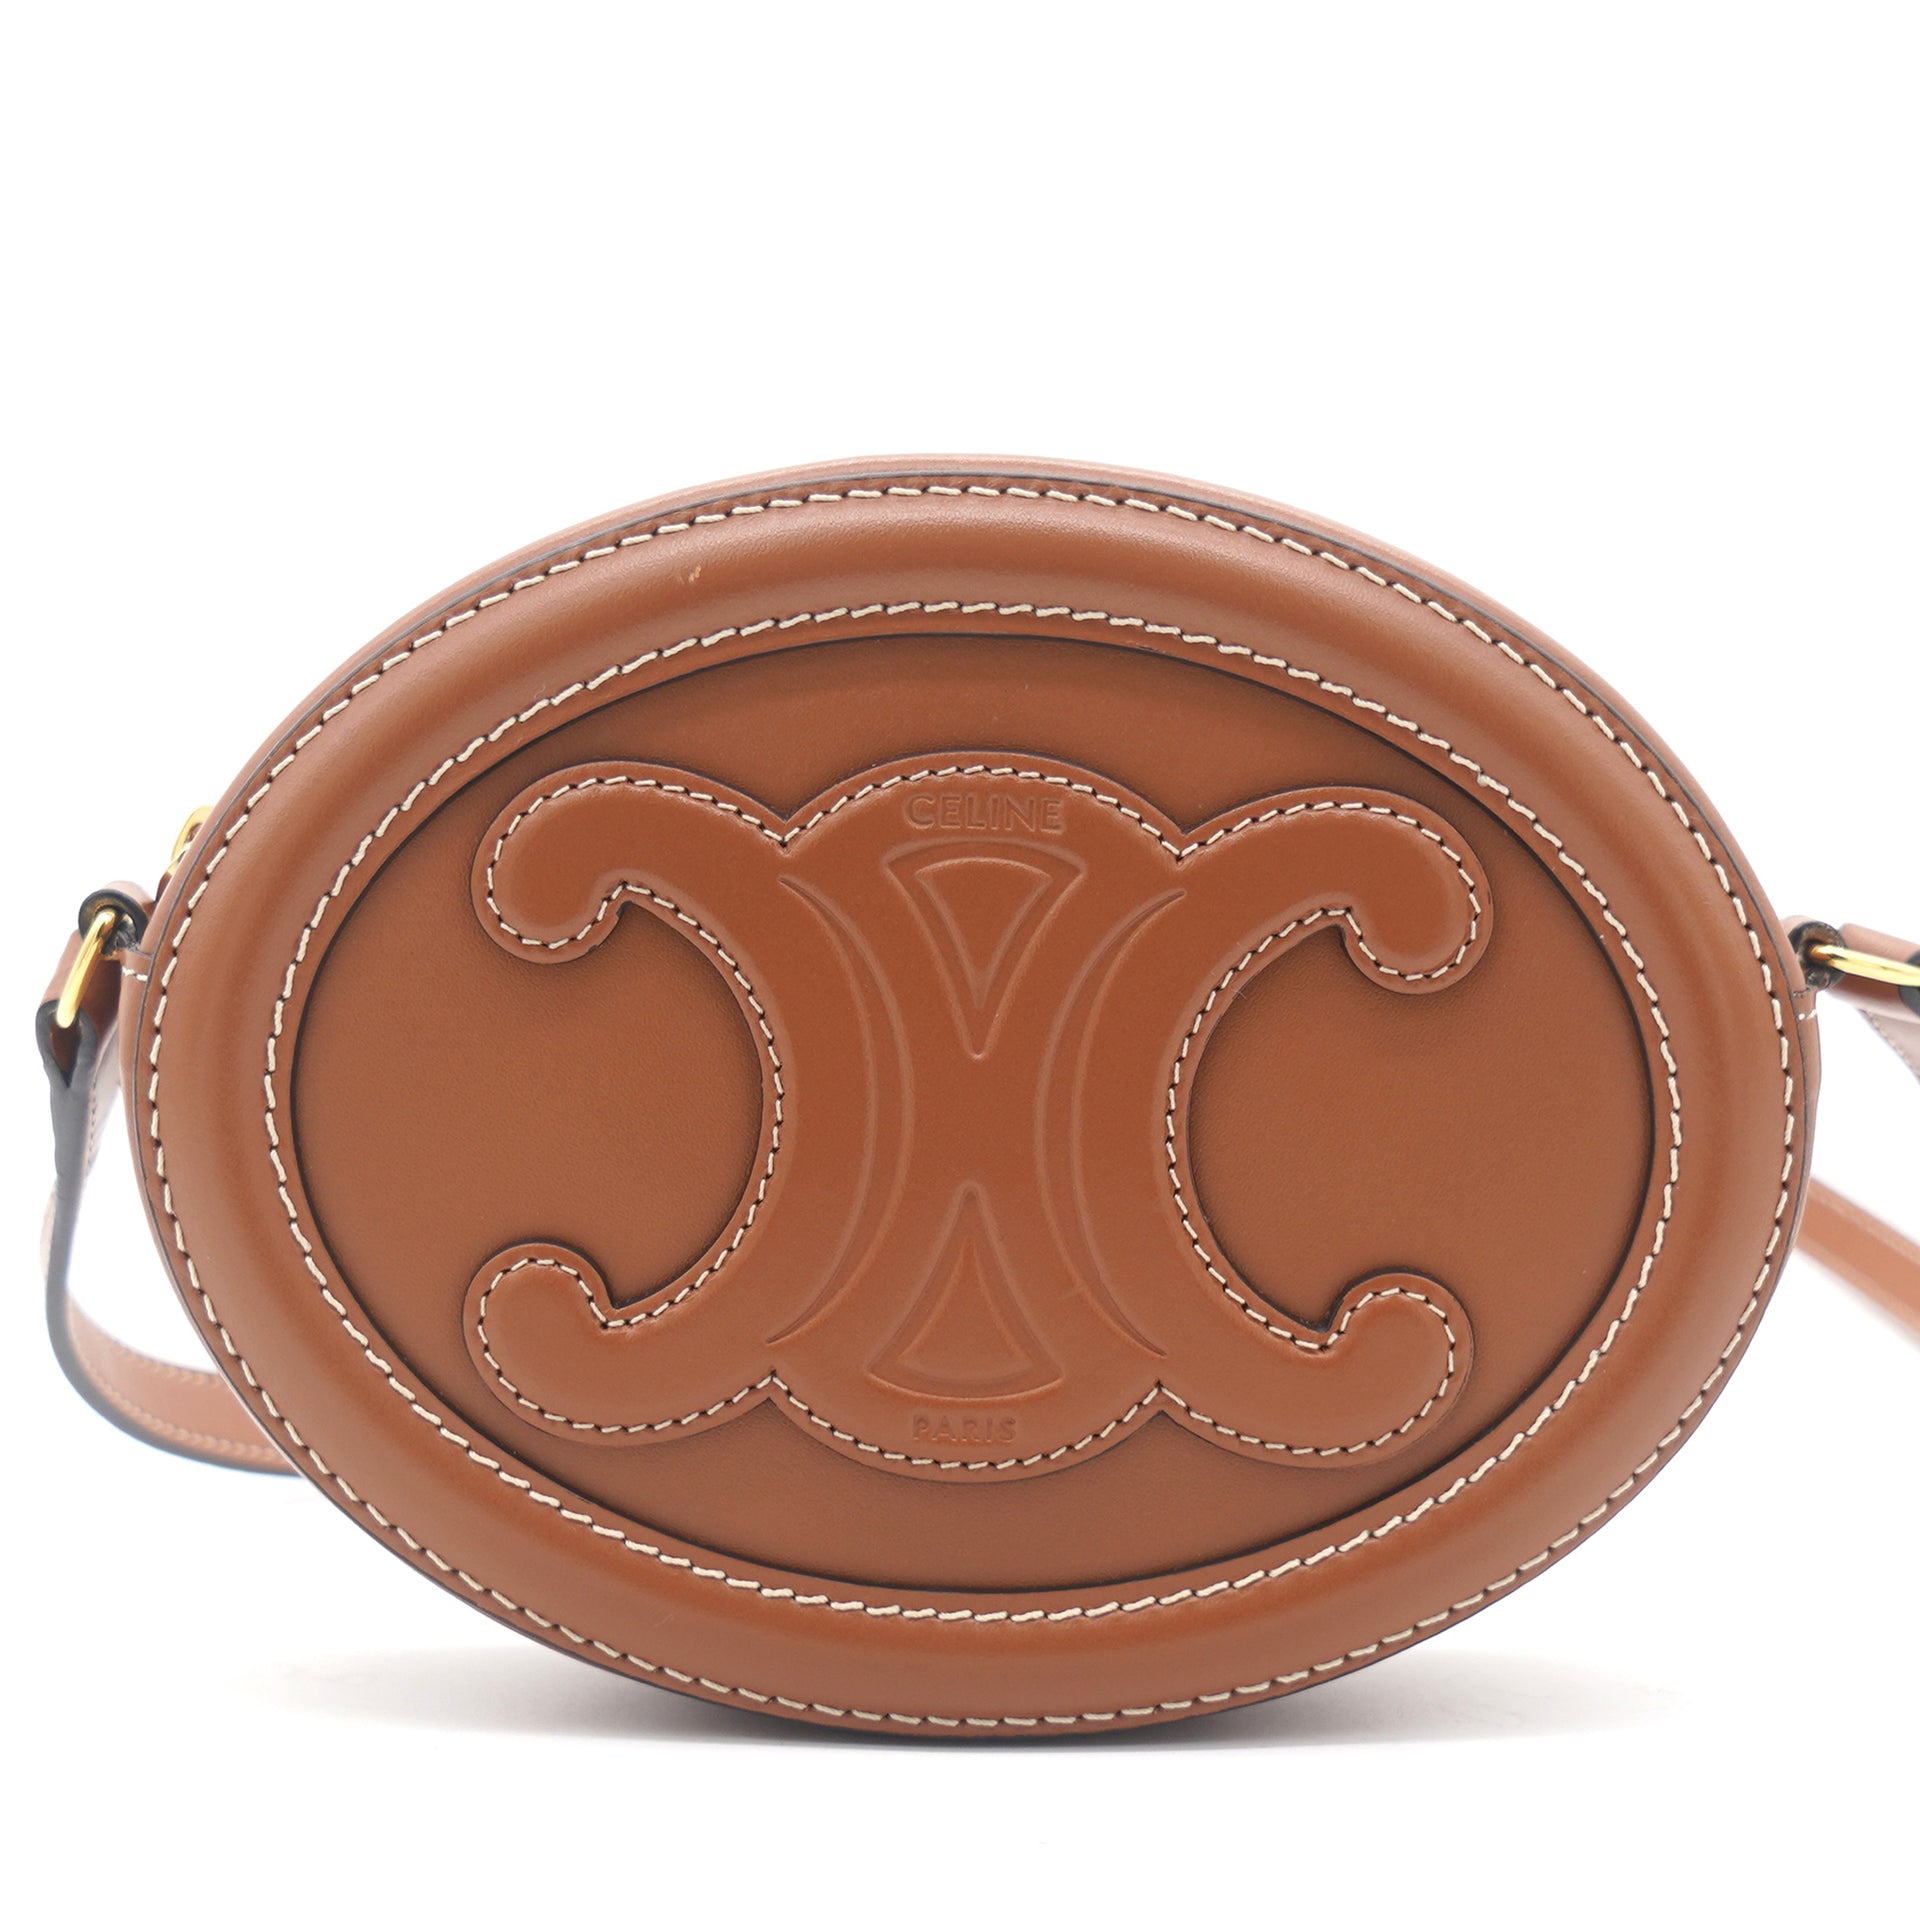 Celine - Crossbody Oval Purse Cuir Triomphe in Textile and Calfskin Leather - White / Beige / Brown - for Women